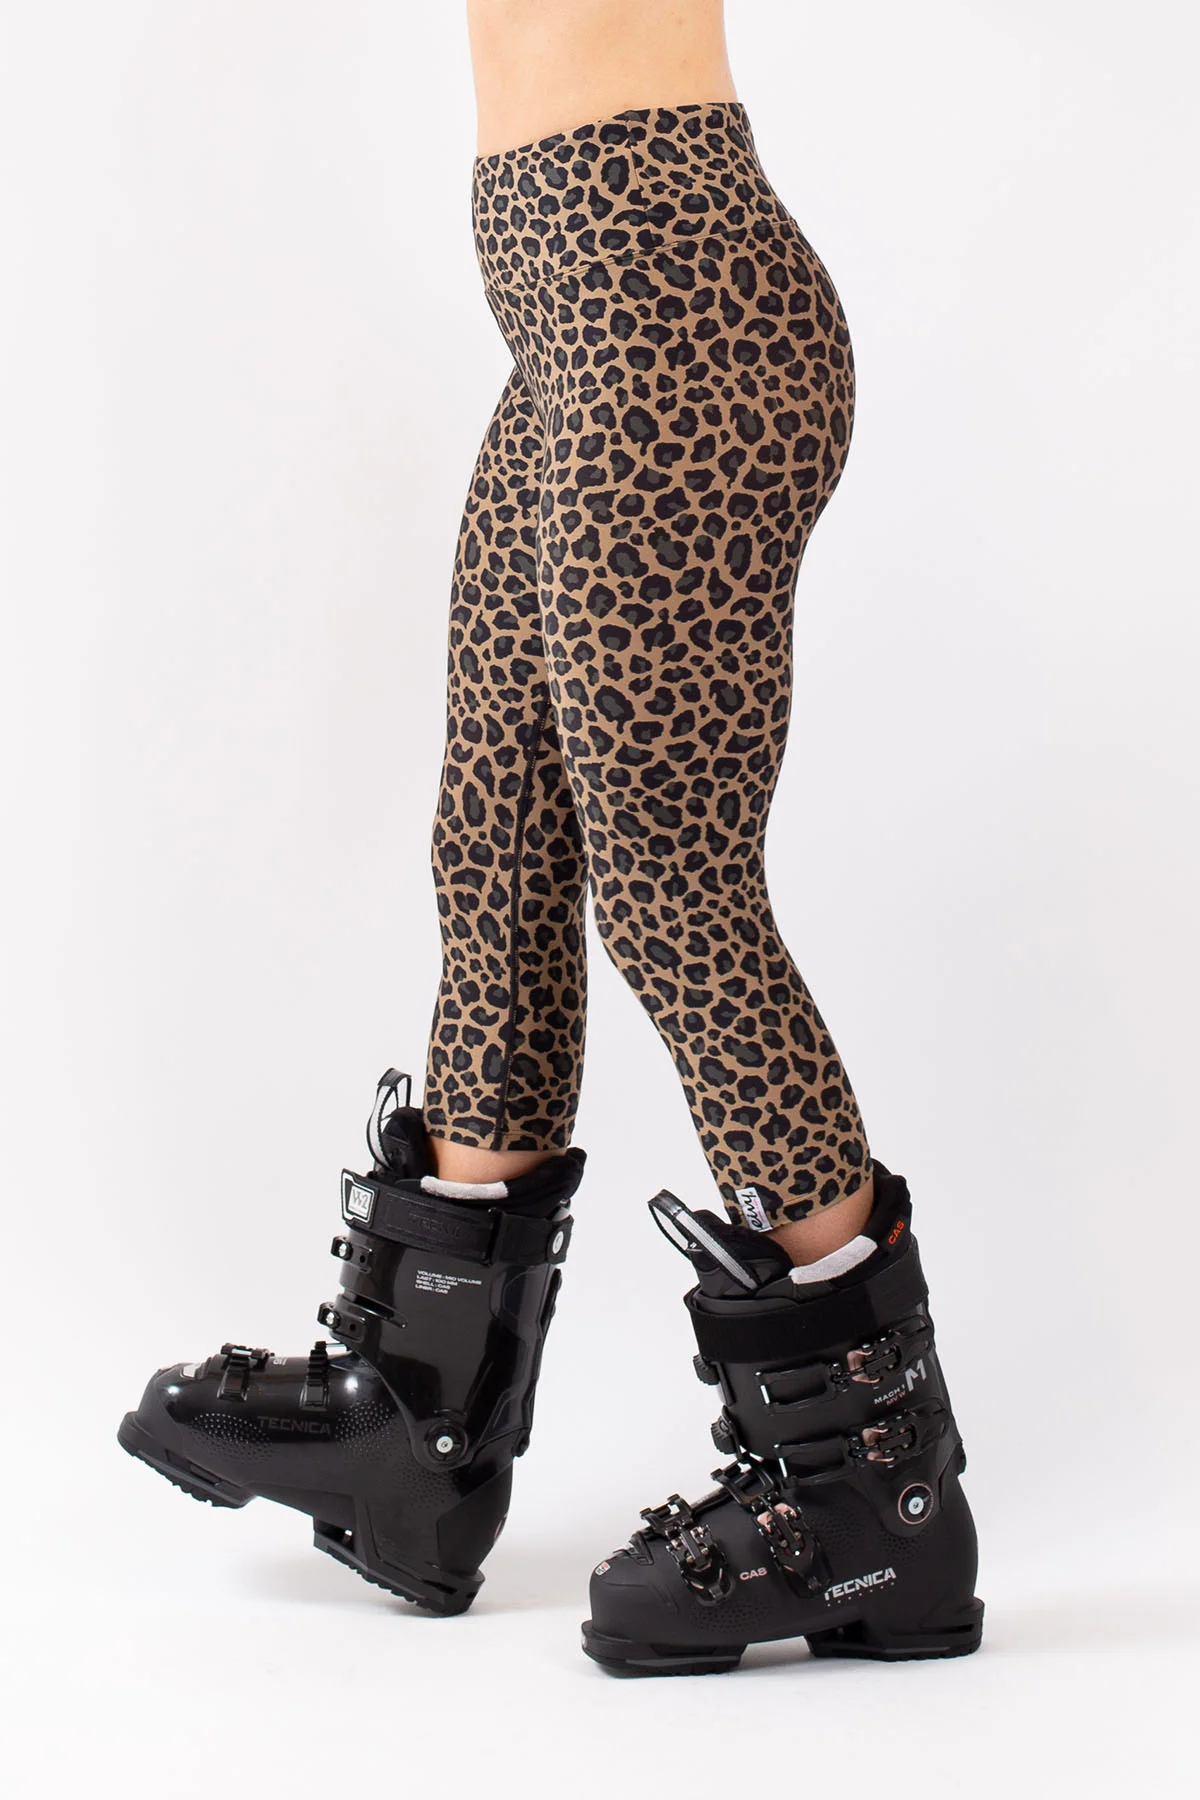 Icecold 3/4 Tights - Leopard | XS